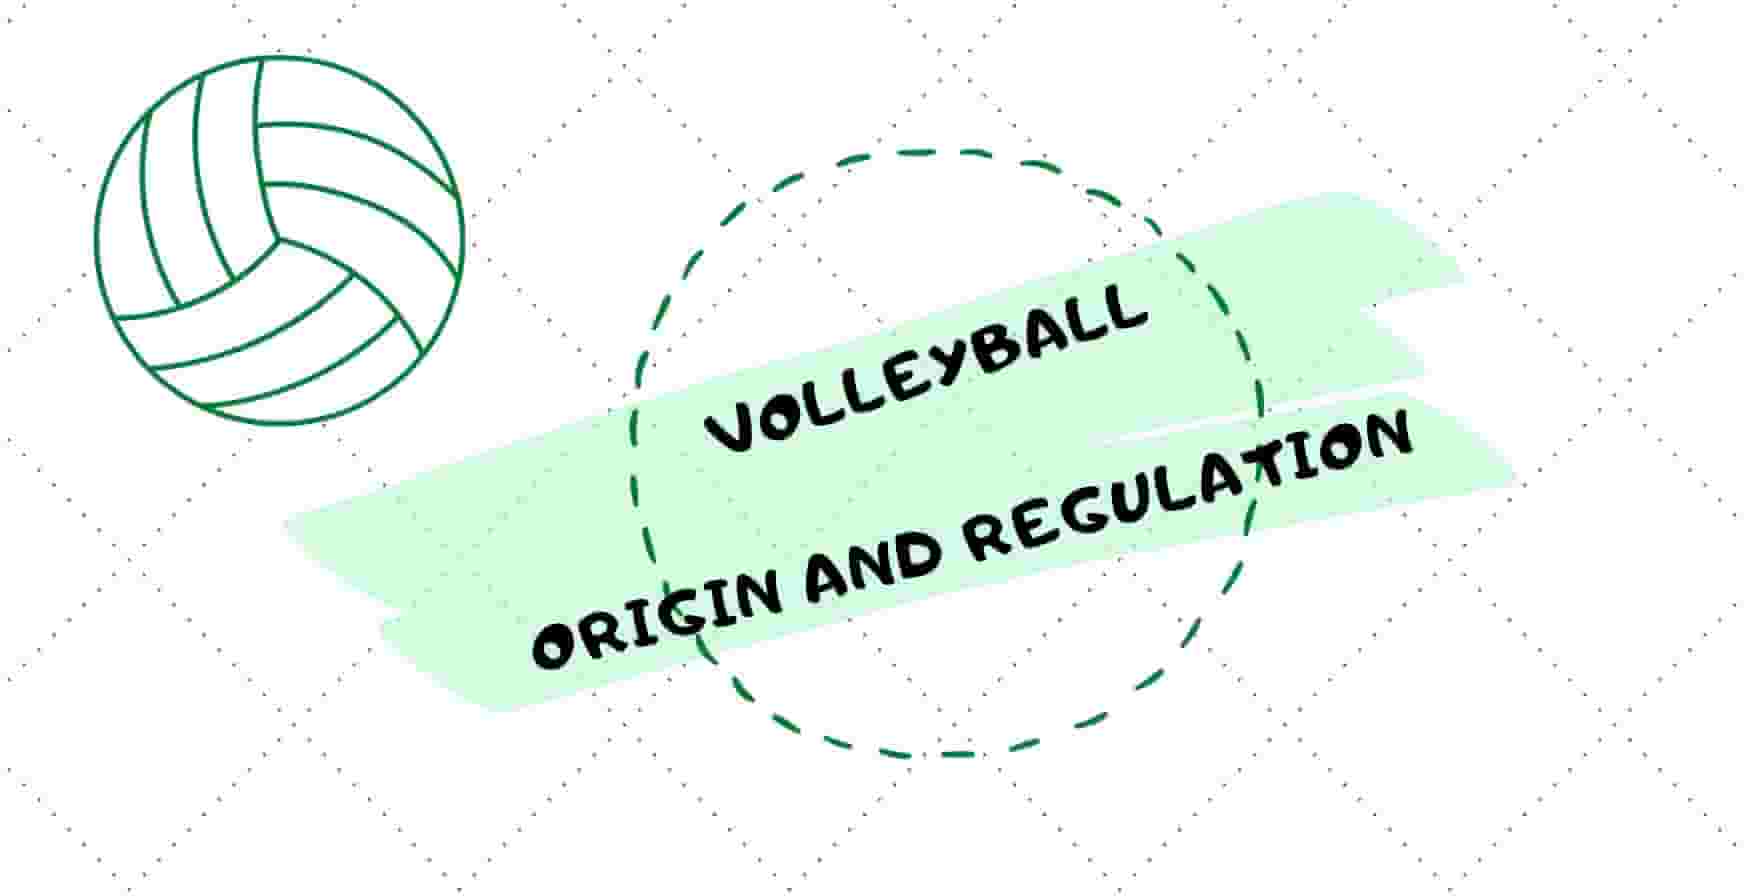 Volleyball: A Concise Account of Its Origin and Regulations